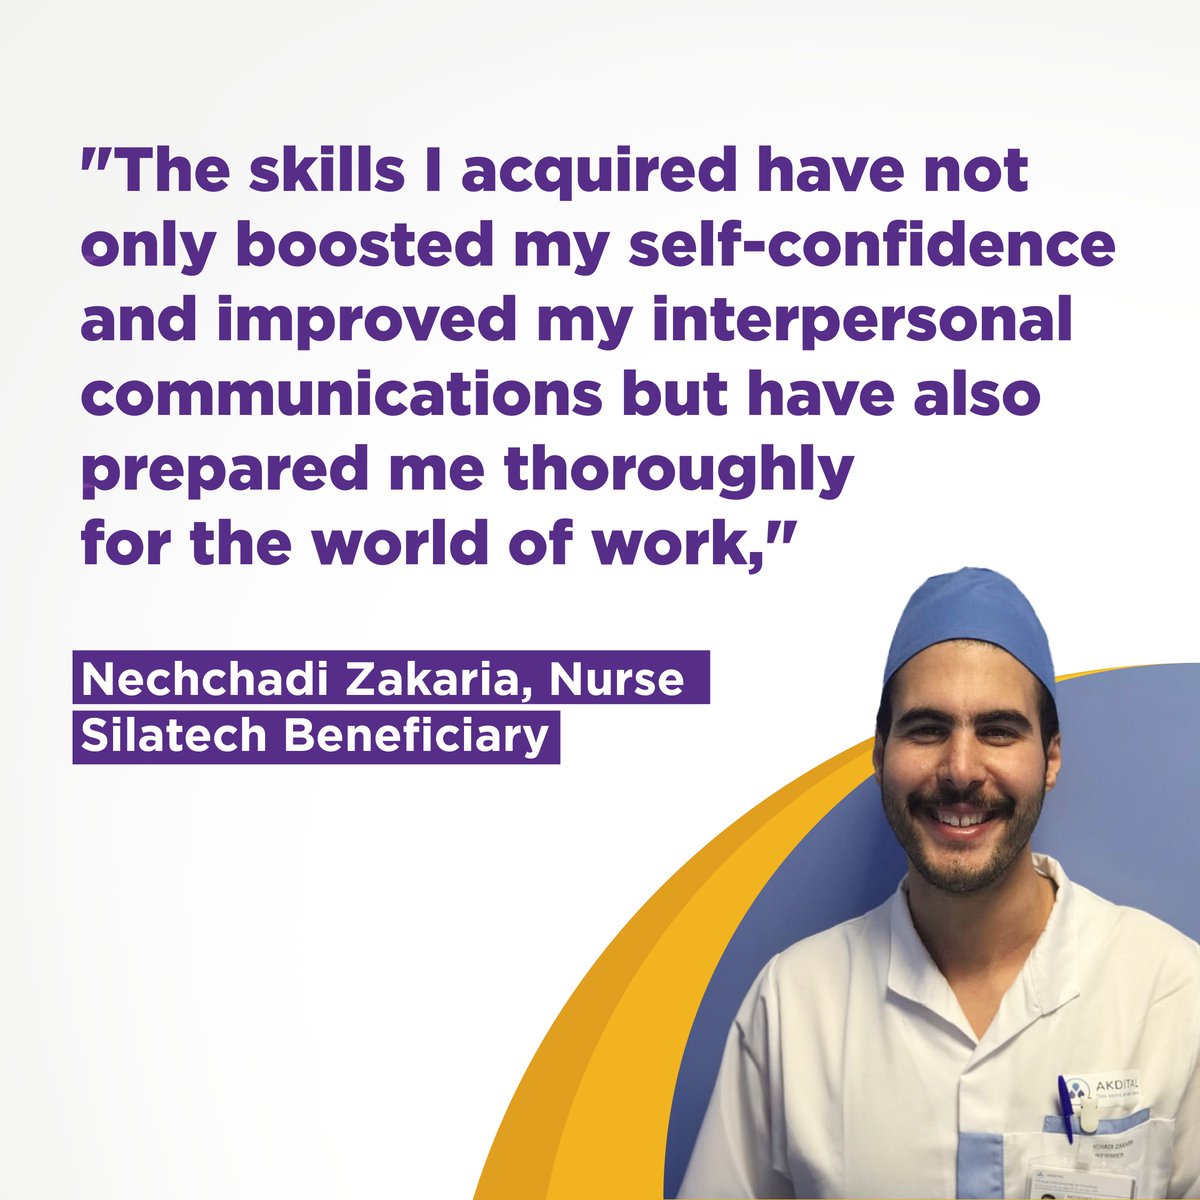 Zakaria Nechchadi's journey from aspiration to reality was made possible by @Silatech, @EFEMaroc & @gatesfoundation.

With newfound skills & confidence, he now thrives as a nurse at Akdital Hospital. 

This collaboration is transforming lives and tackling youth unemployment.